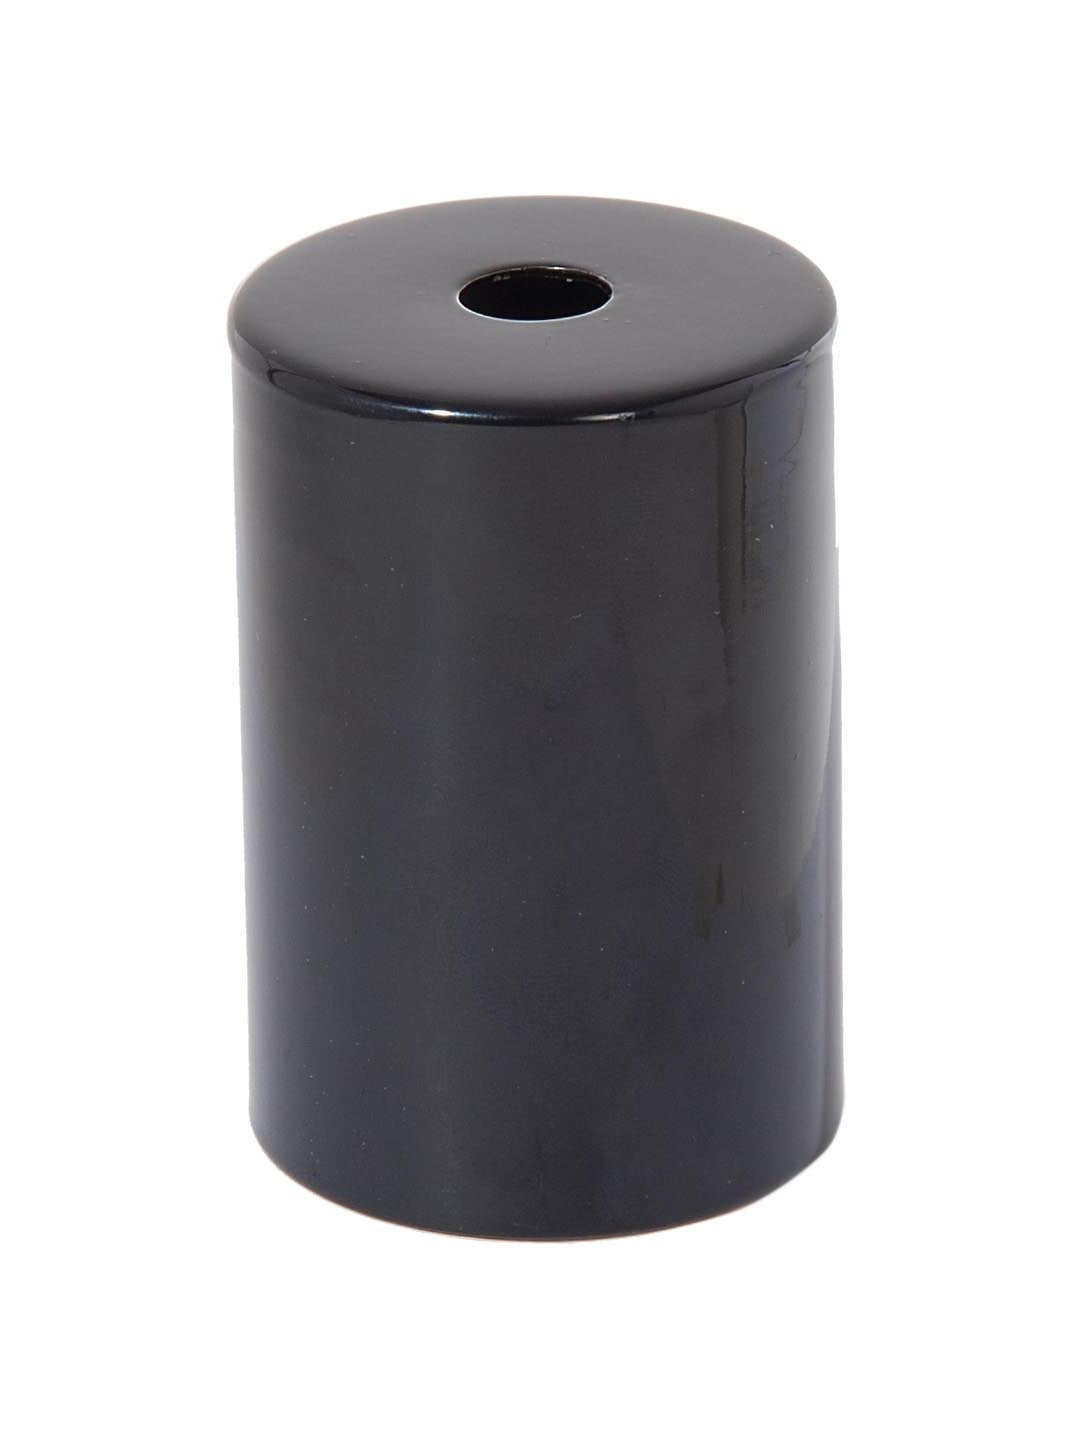 Glossy Black Finish Steel E-26 Lamp Socket Cup COMPLETE with Socket and Mounting Hardware